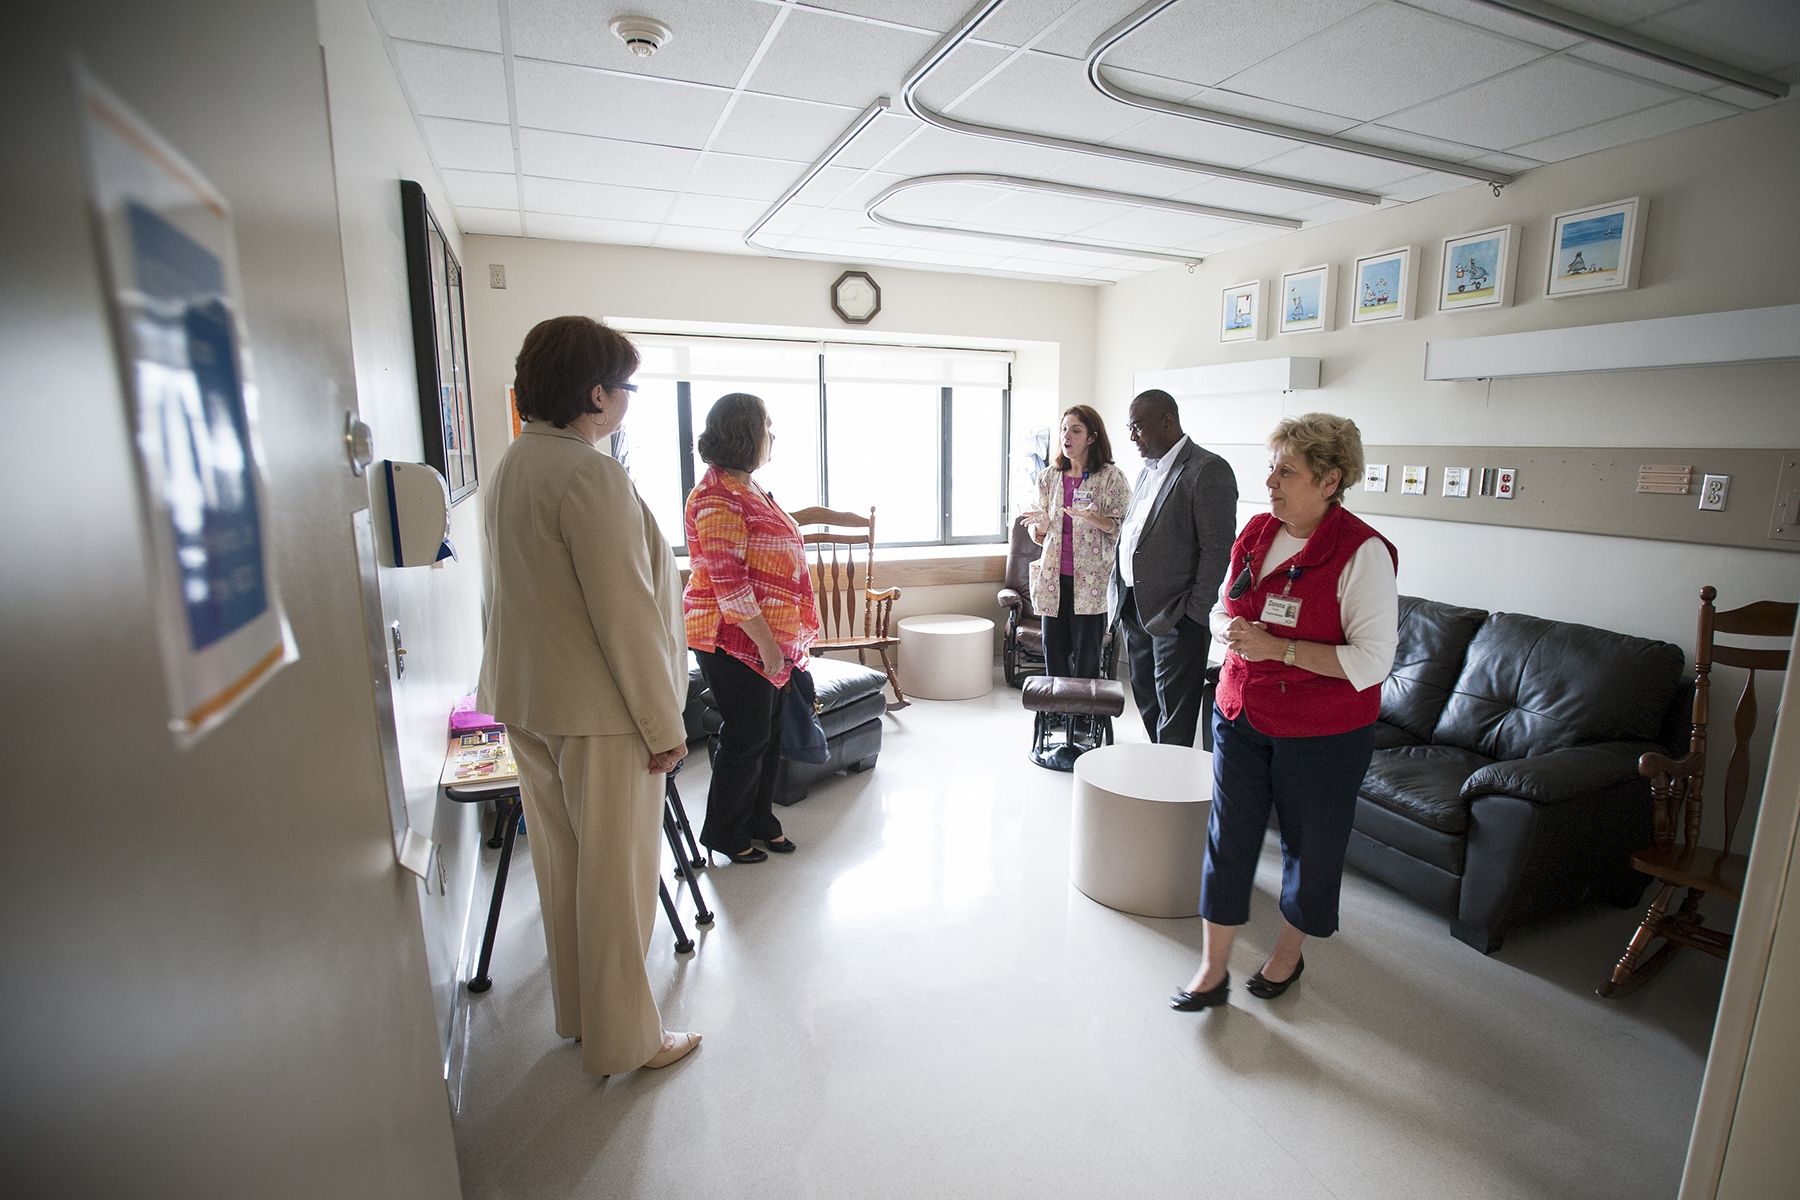 Bernard Roberson from Georgia Regents Health and Angela Morin, a KGH Patient Experience Advisor, talk with Kelli Kitchen, Program Manager at KGH on our newly renovated Neonatal Intensive Care Unit about the new Family Integrated Care model they are helping pioneer.